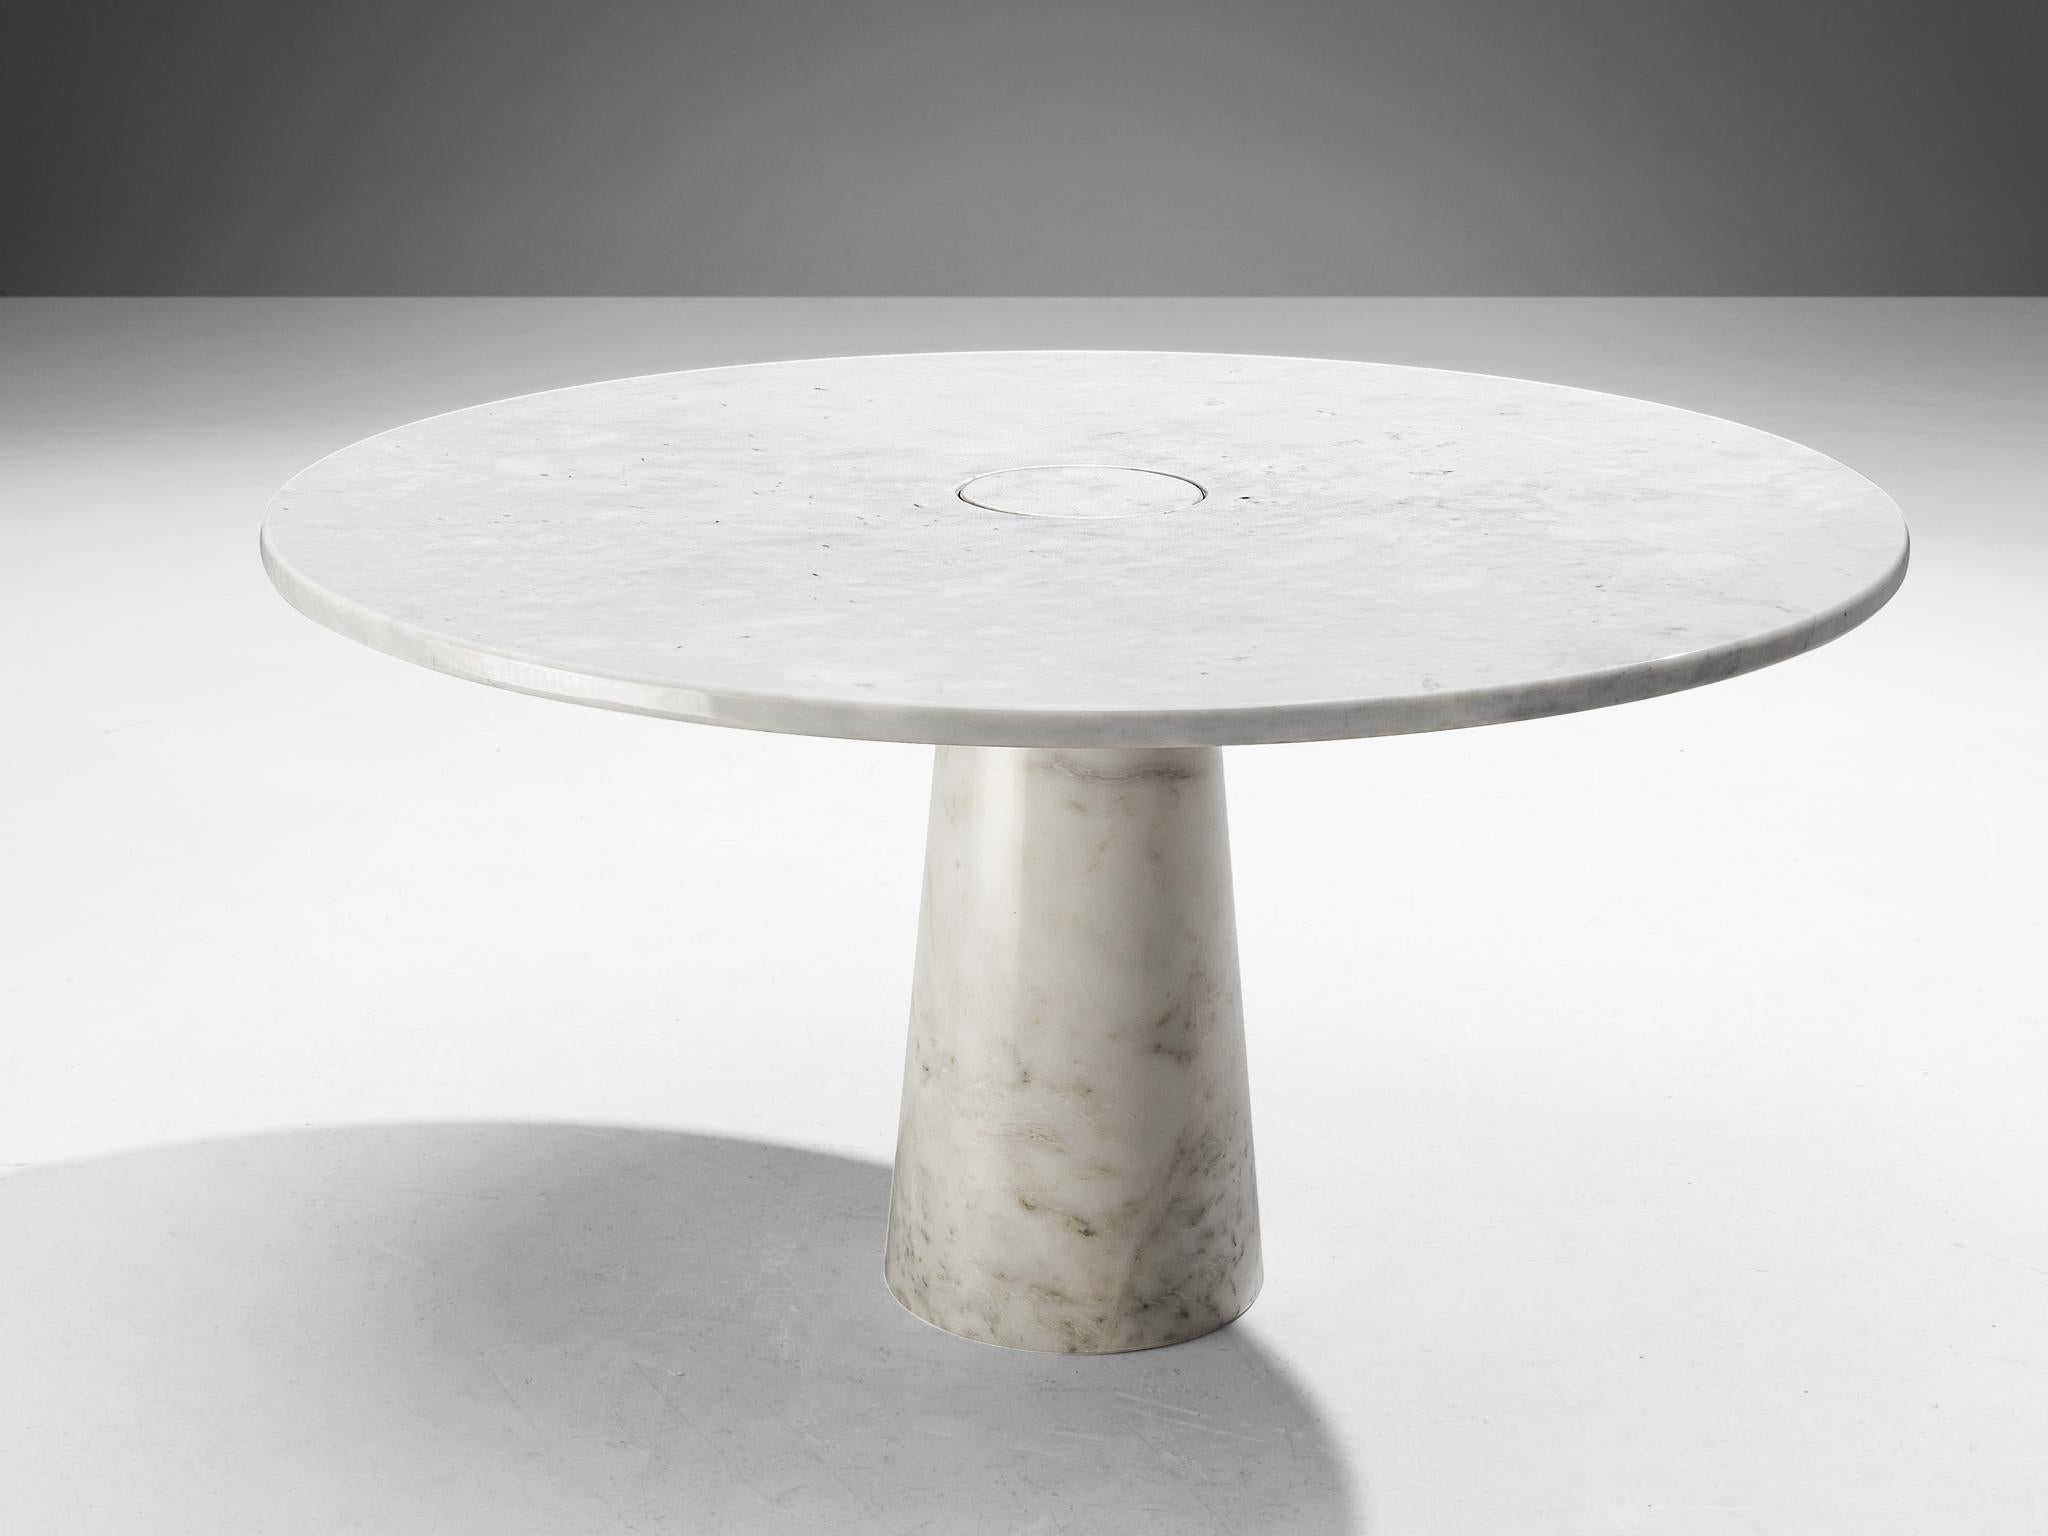 Angelo Mangiarotti for Skipper, dining table ‘Eros’, Carrara marble, 1970s

This sculptural table by Angelo Mangiarotti is a skilful example of postmodern design. The table is executed in white Carrara marble. The round tabletop features no joints